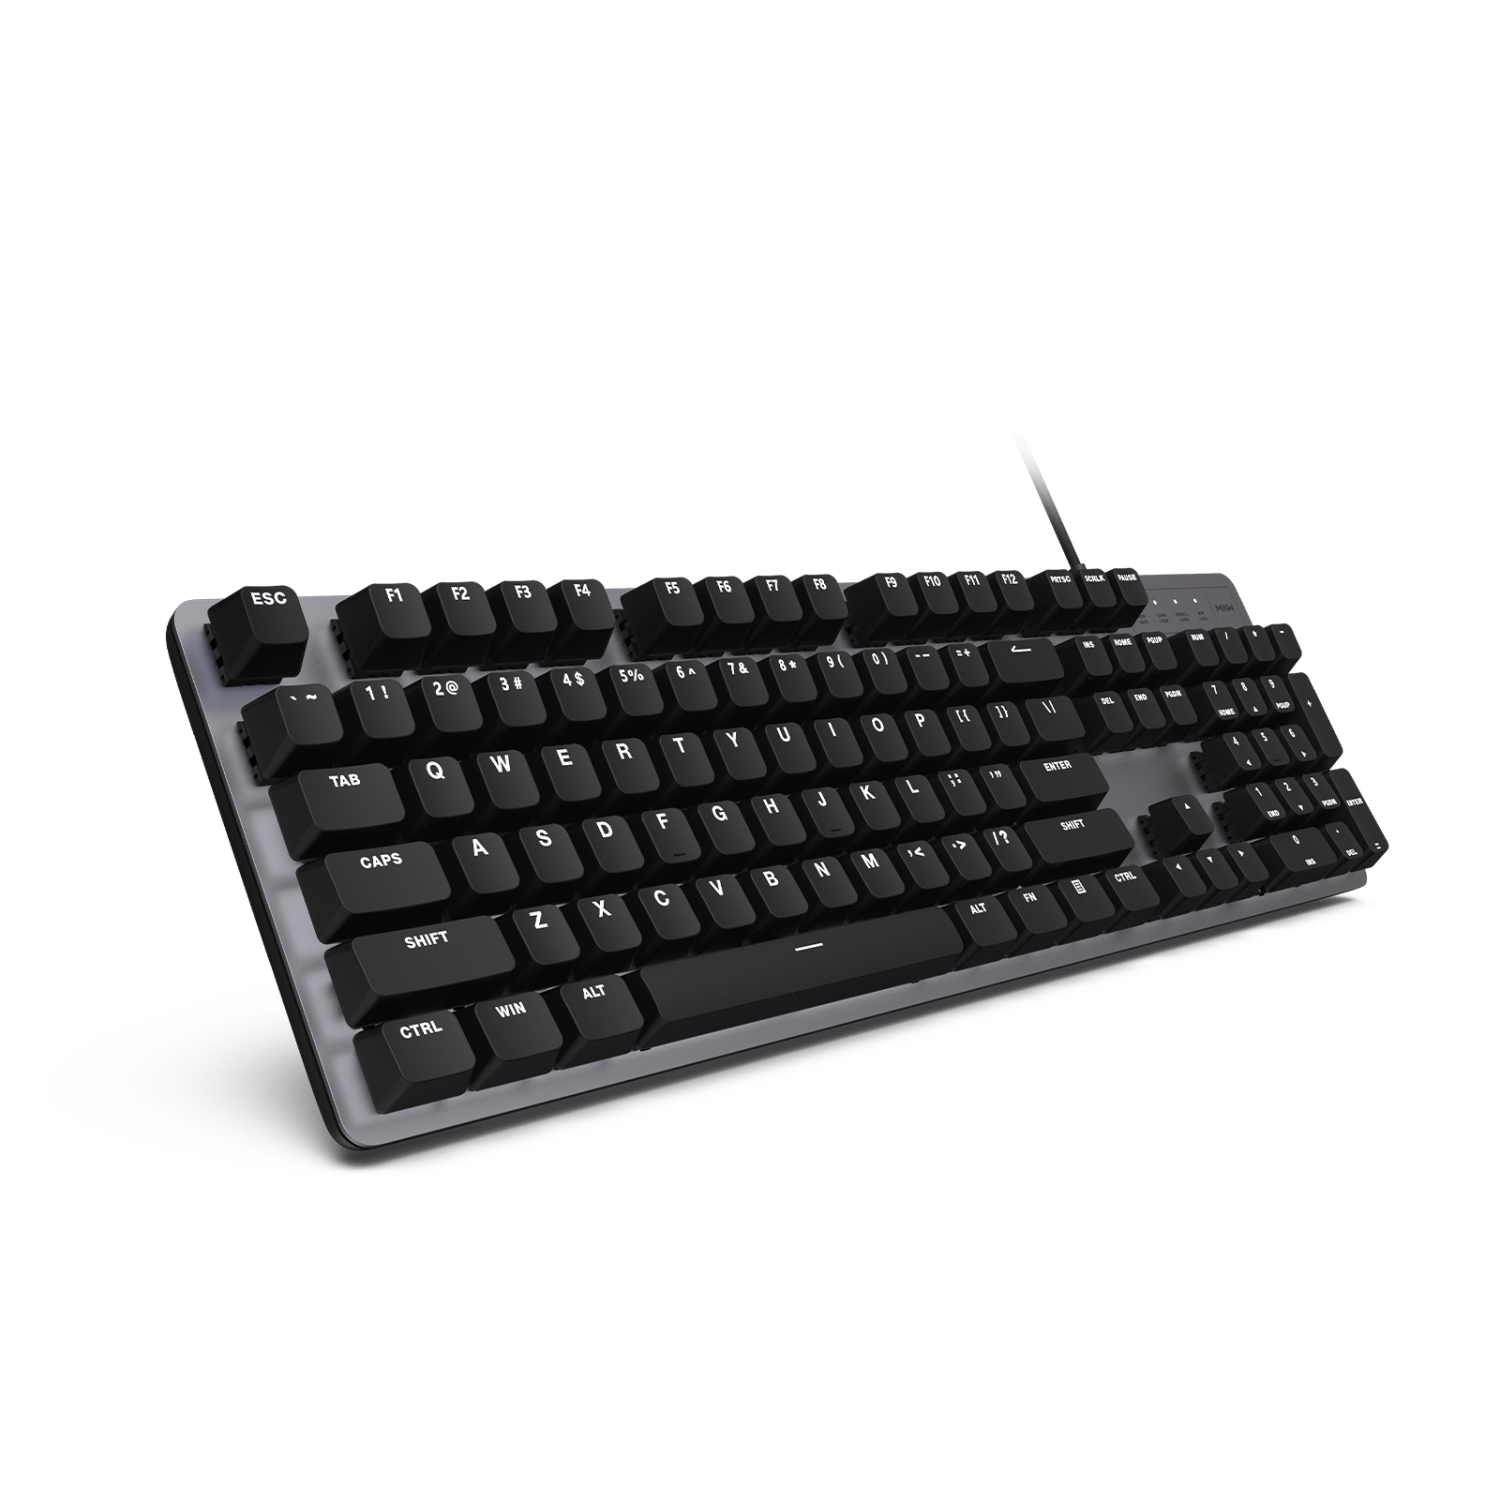 XIAOMI MIIIW G03 Full Size Mechanical Gaming Keyboard, LED Wired Keyboard with Floating Keys, Kailh Red Switches, 104 Keys